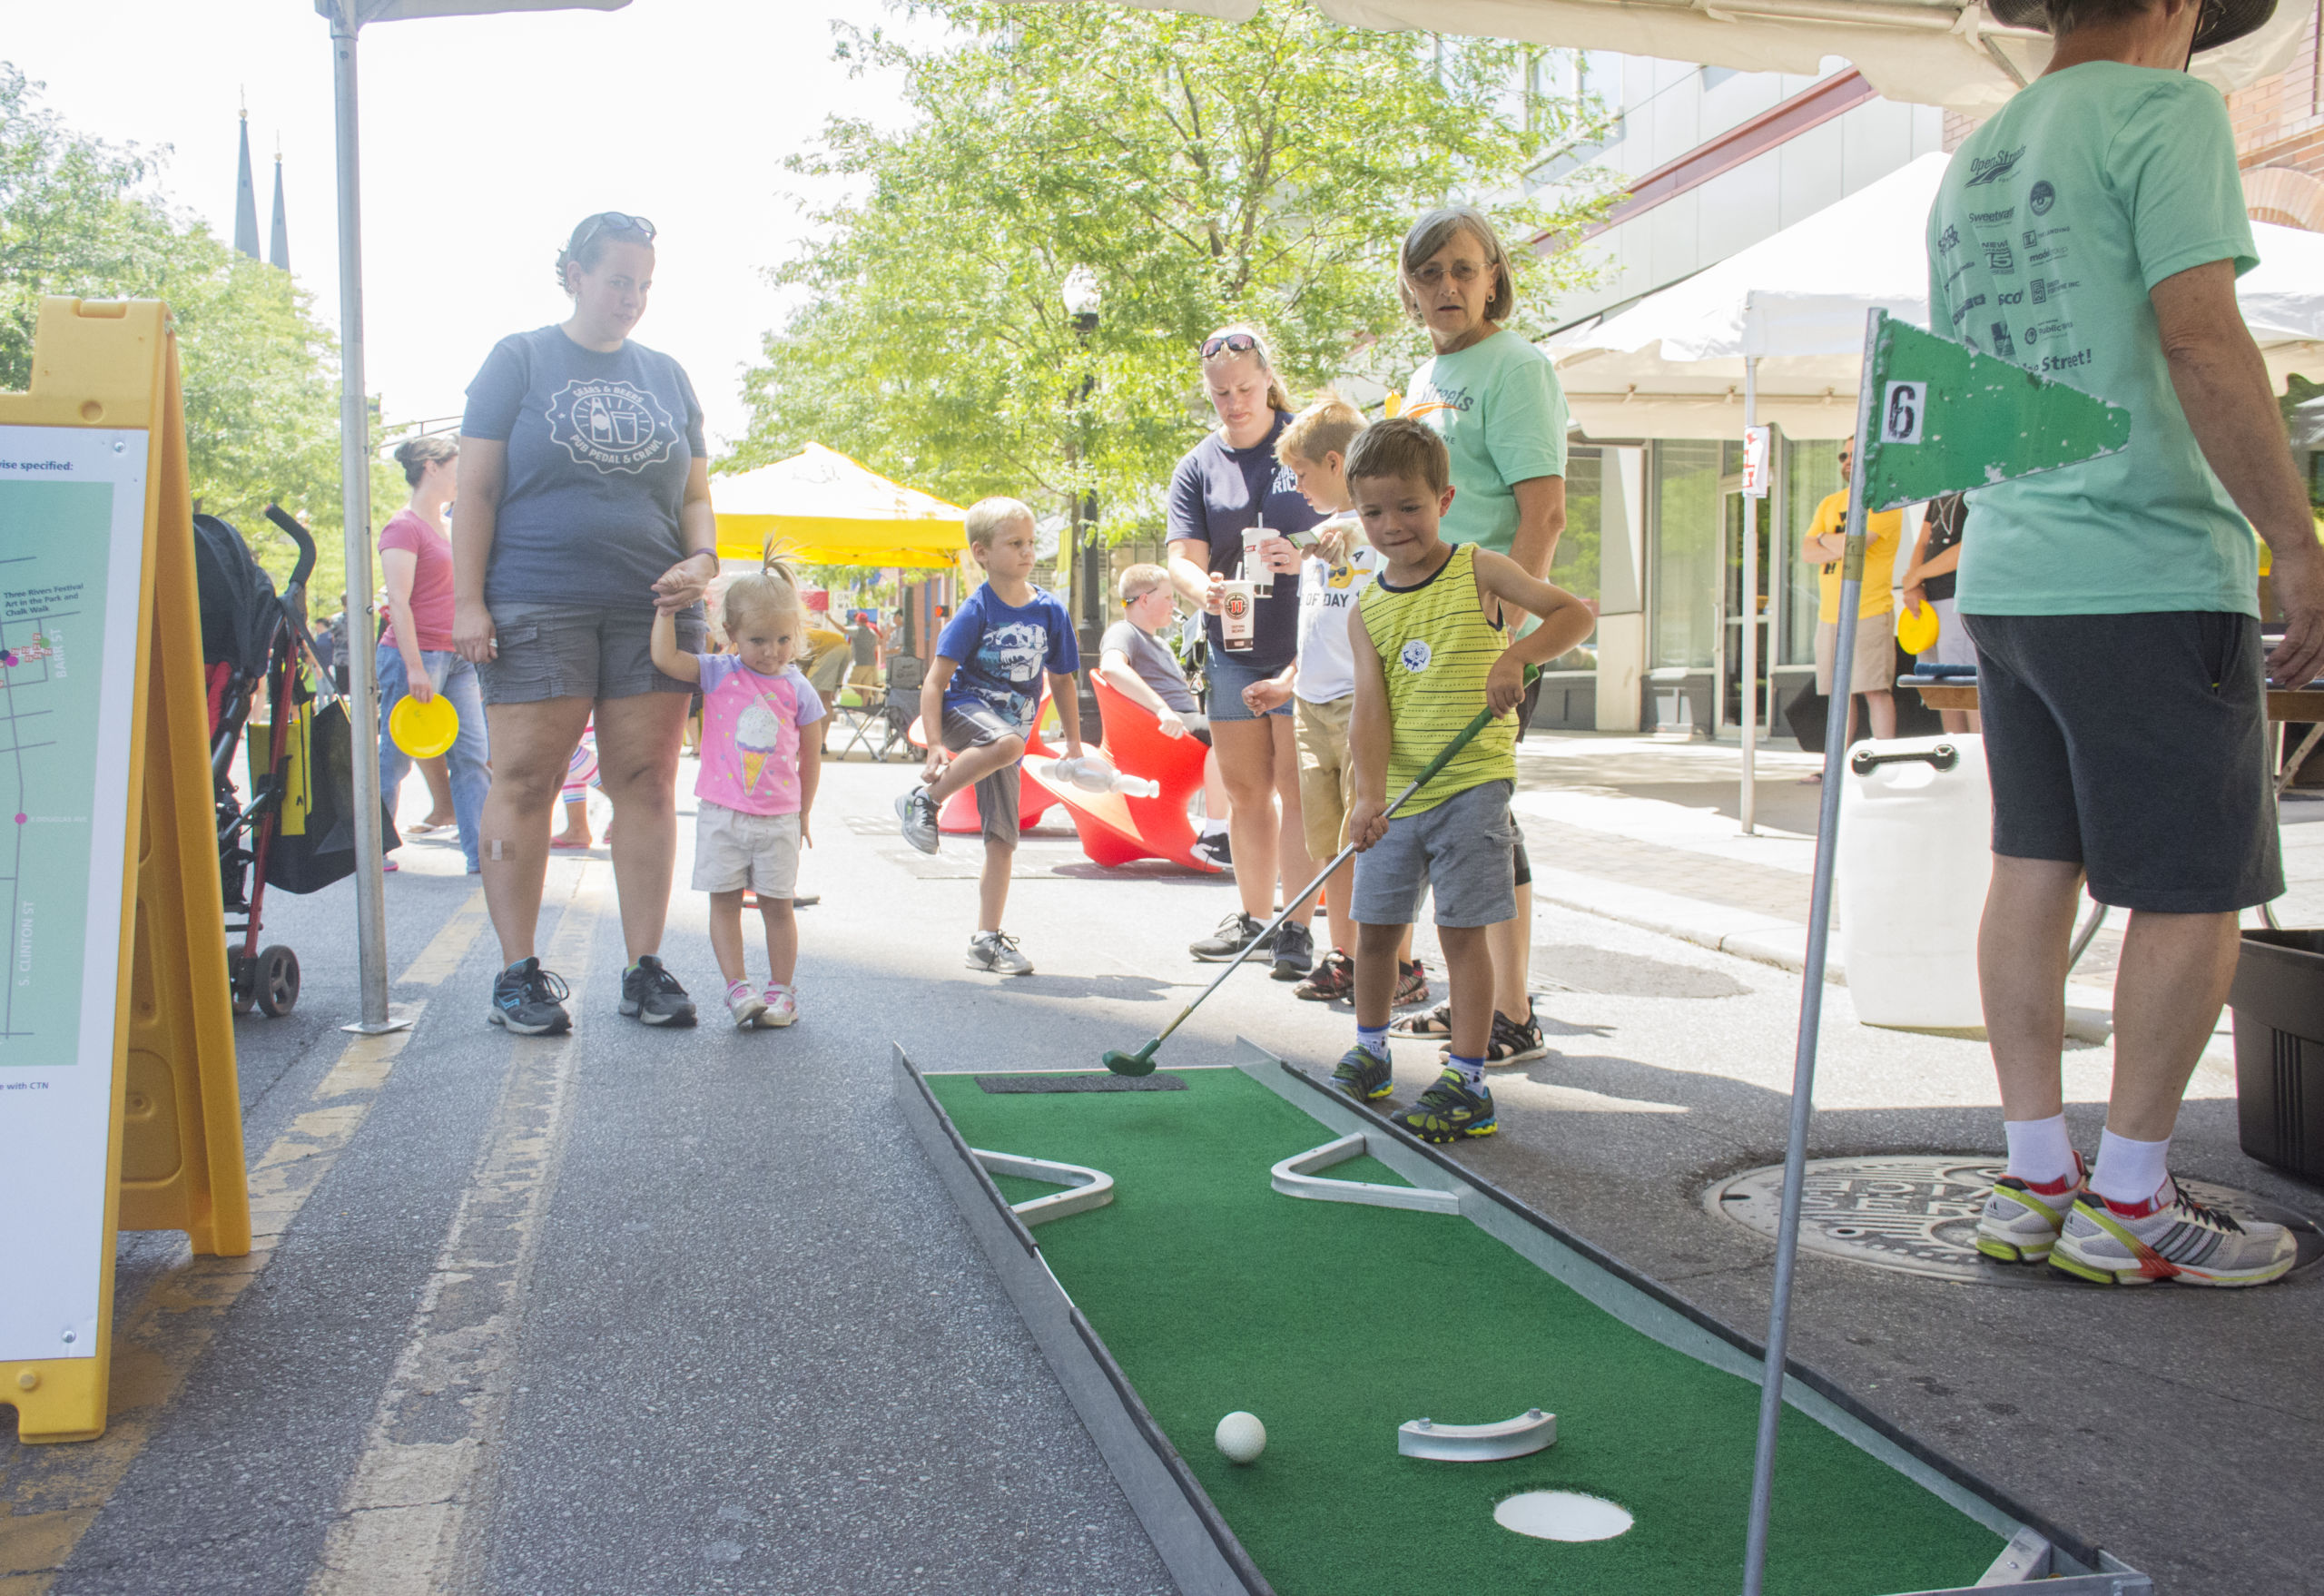 Mini golf at the Open Streets festival in Fort Wayne